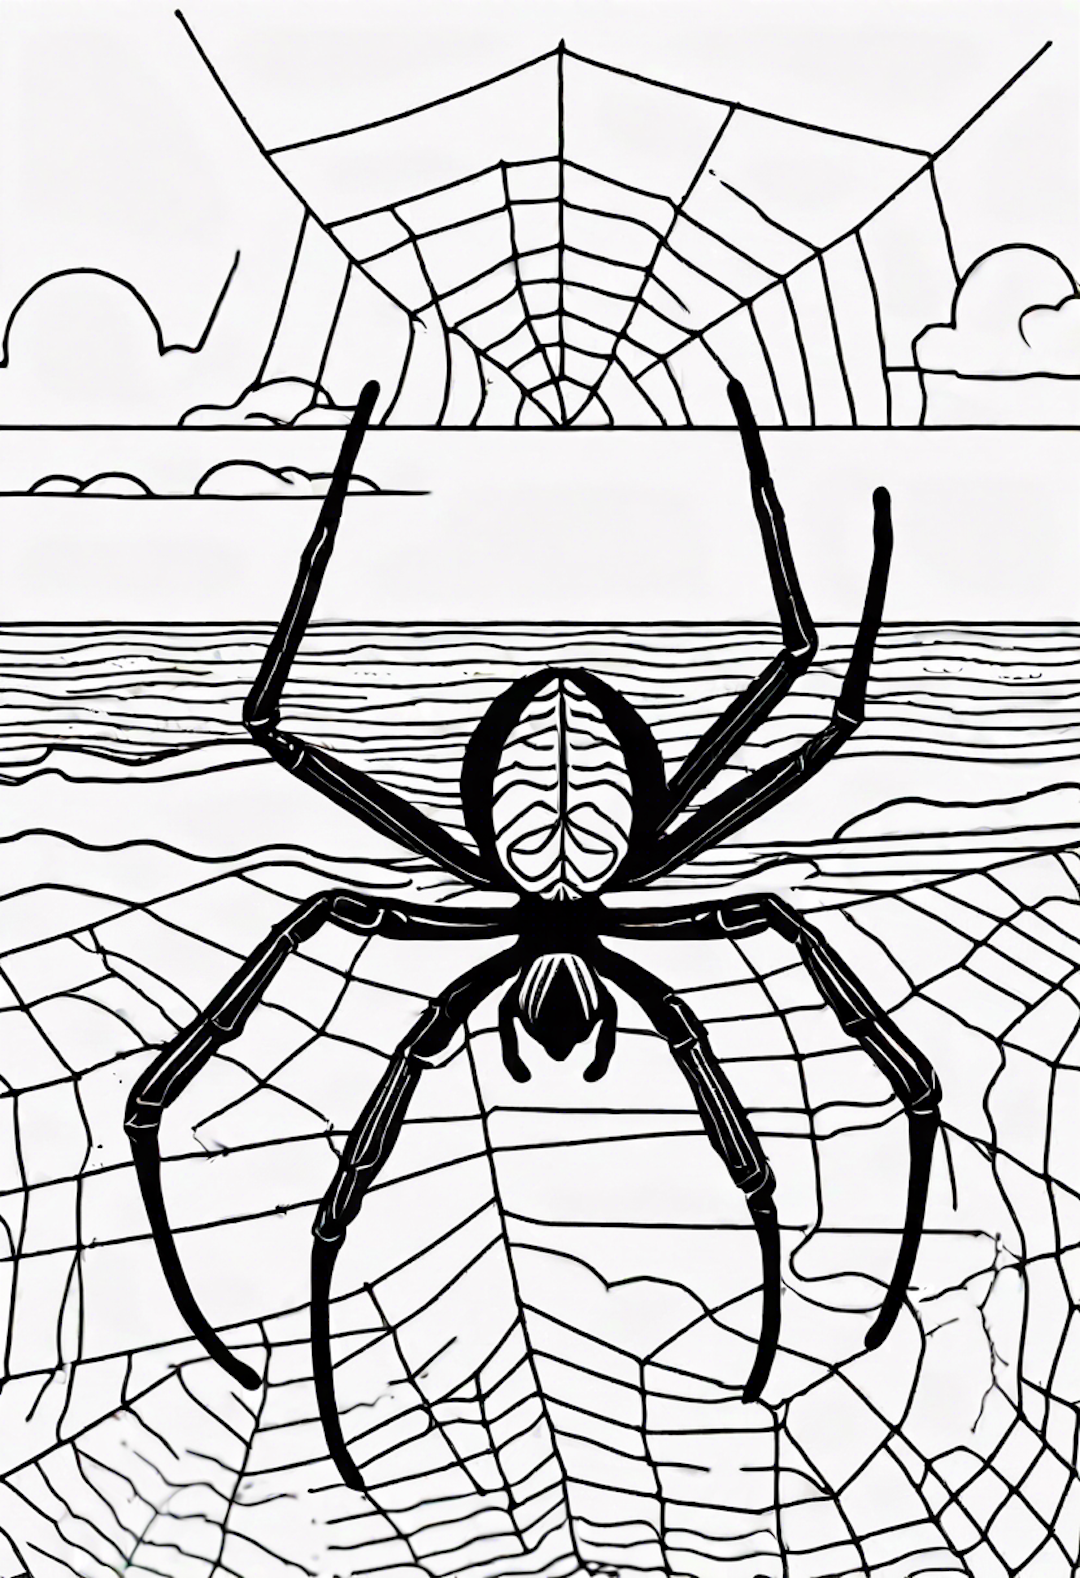 A Spider On A Web At A Beach